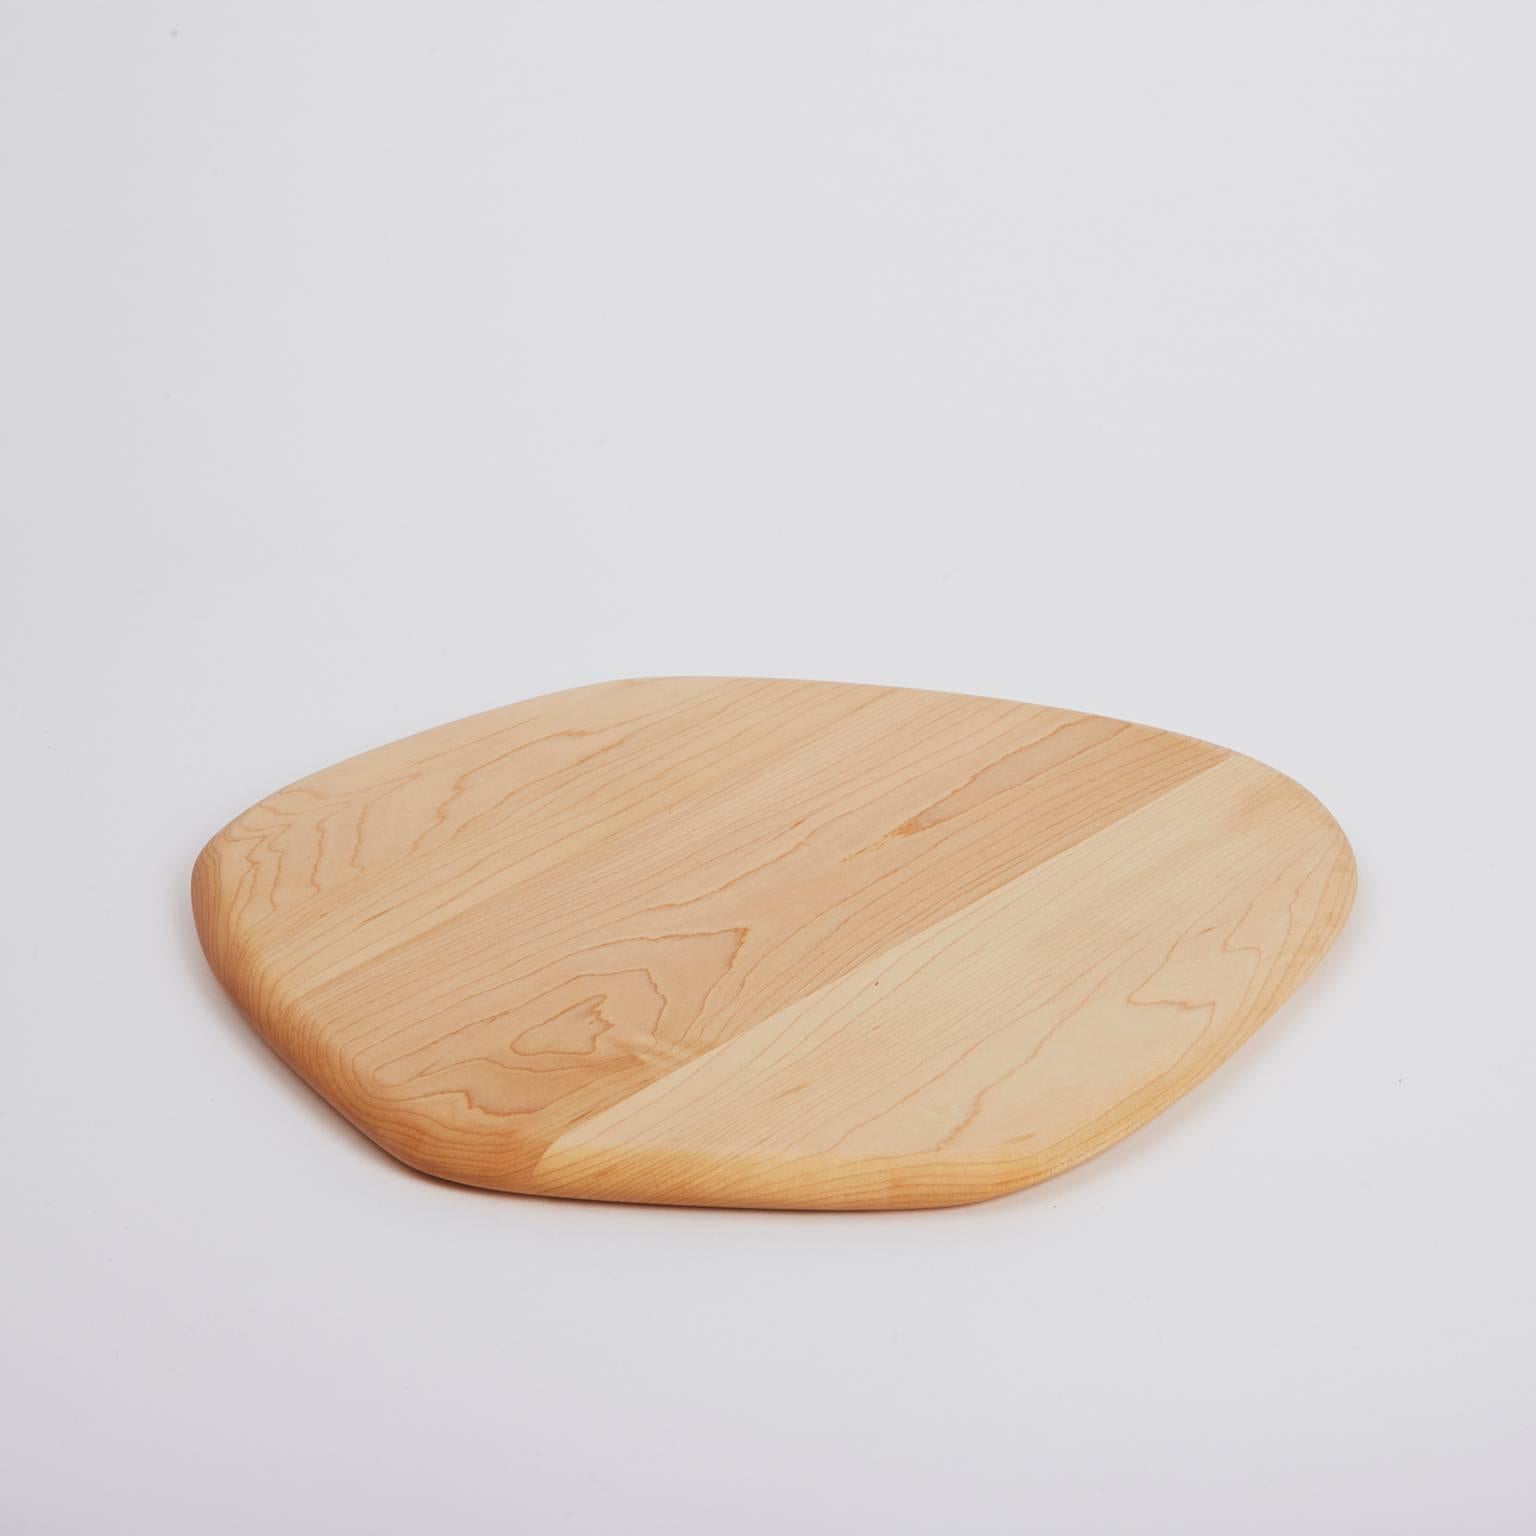 Handcrafted in Brooklyn, Noah Spencer carefully selects wood with beautiful grain patterns to create each Pebble Cutting Board. These sculptural and functional objects are great for simple kitchen cutting and artful food presentation.  

Materials: